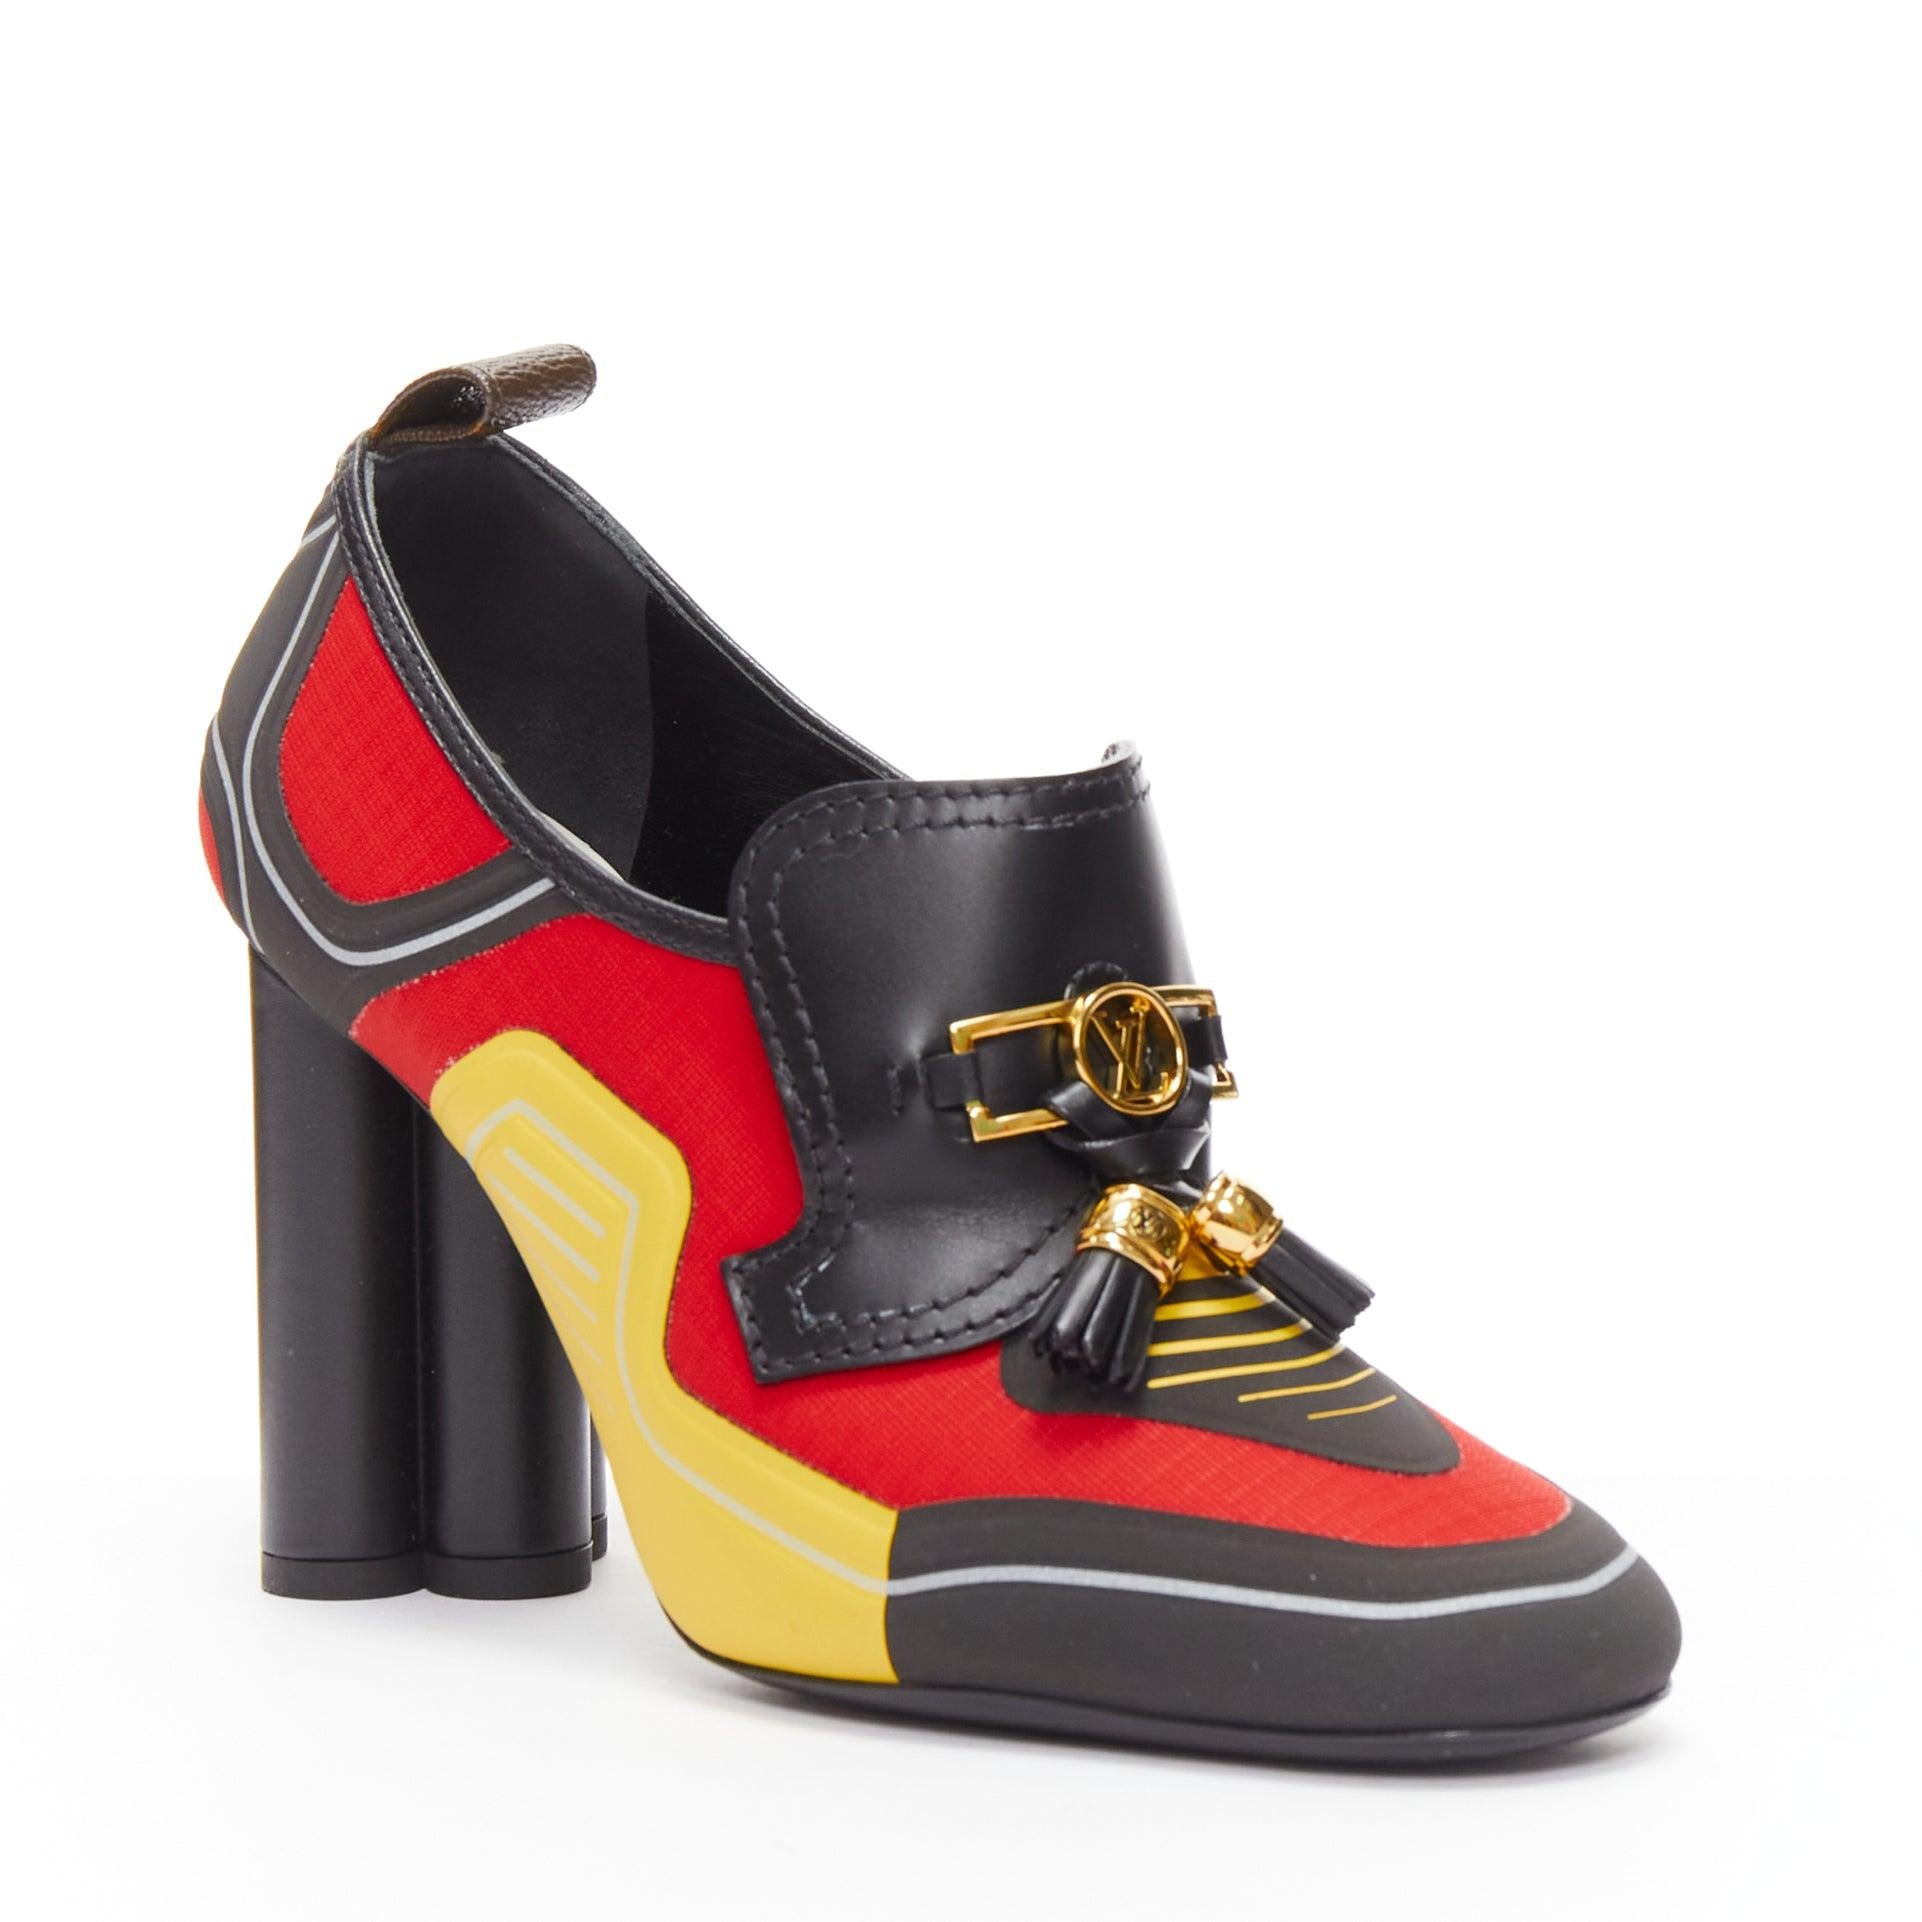 LOUIS VUITTON 2020 Runway red sports neoprene tassel flower heel loafer EU38
Reference: TGAS/D00899
Brand: Louis Vuitton
Designer: Nicolas Ghesquiere
Collection: 2020 - Runway
Material: Fabric, Leather
Color: Red, Black
Pattern: Solid
Closure: Slip